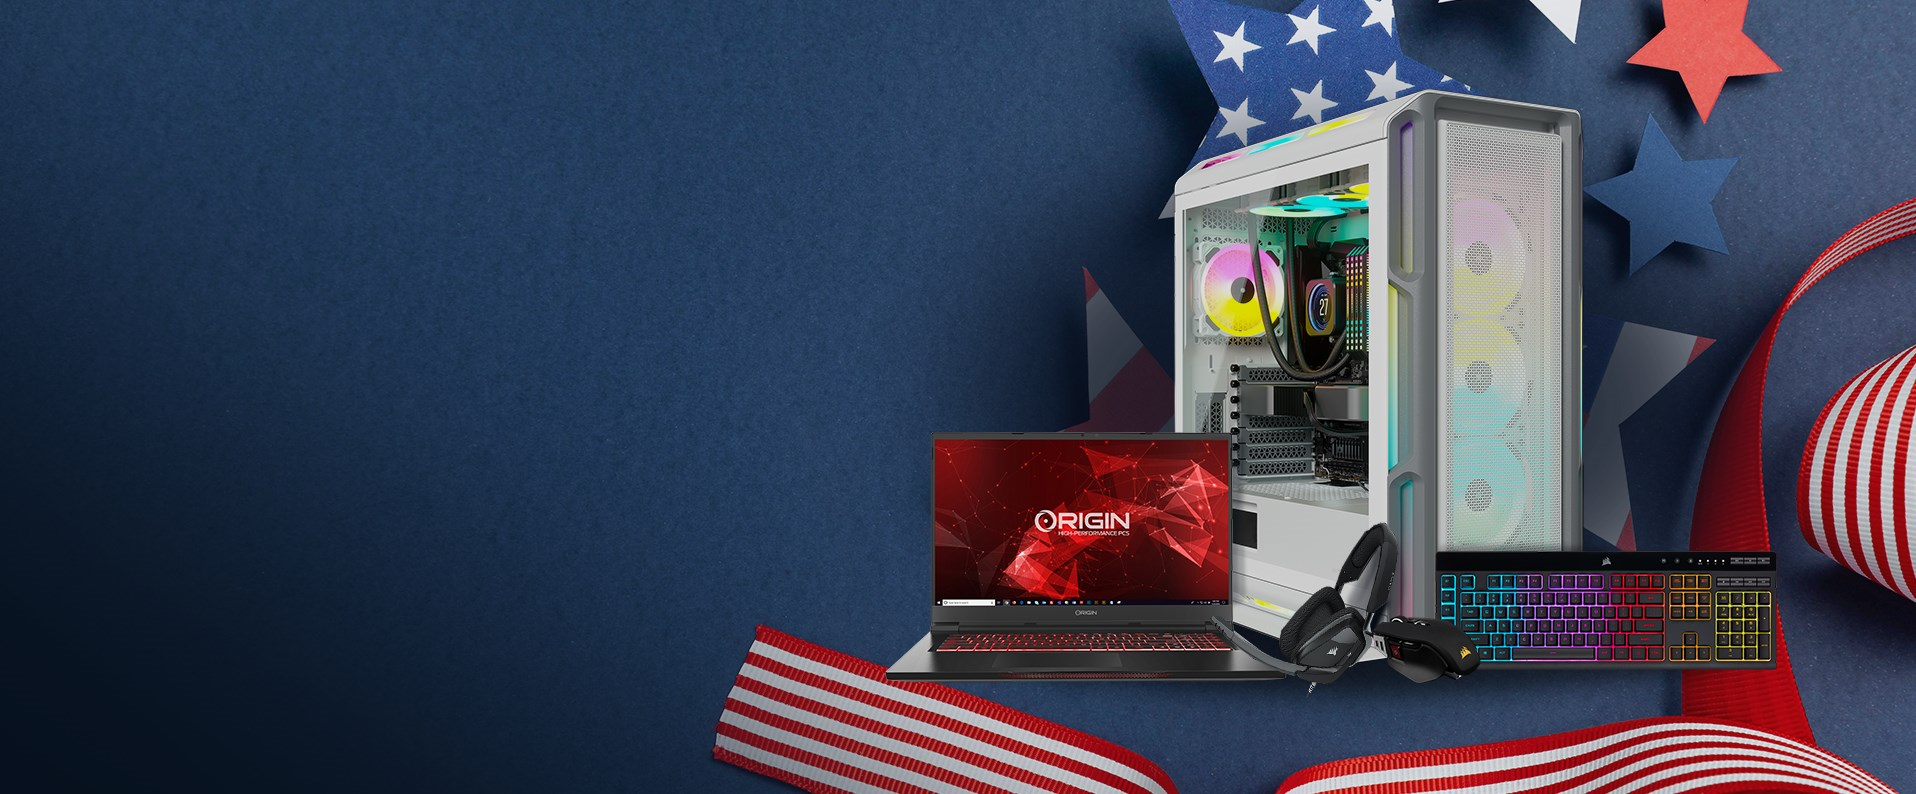 ORIGIN PC July 4th Promotion is live!